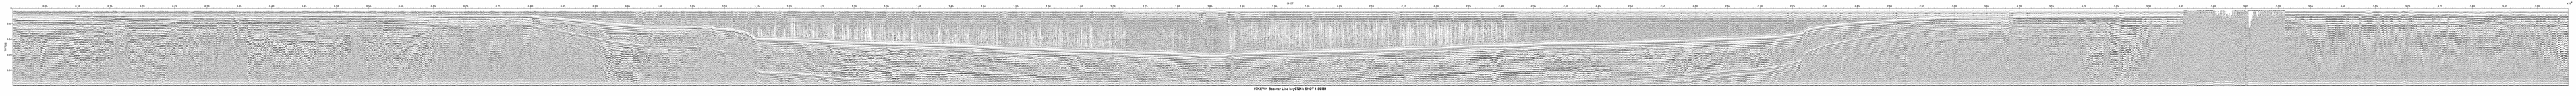 Thumbnail GIF image of the seismic trackline key9721b, with a hotlink to the more detailed, larger JPG image.